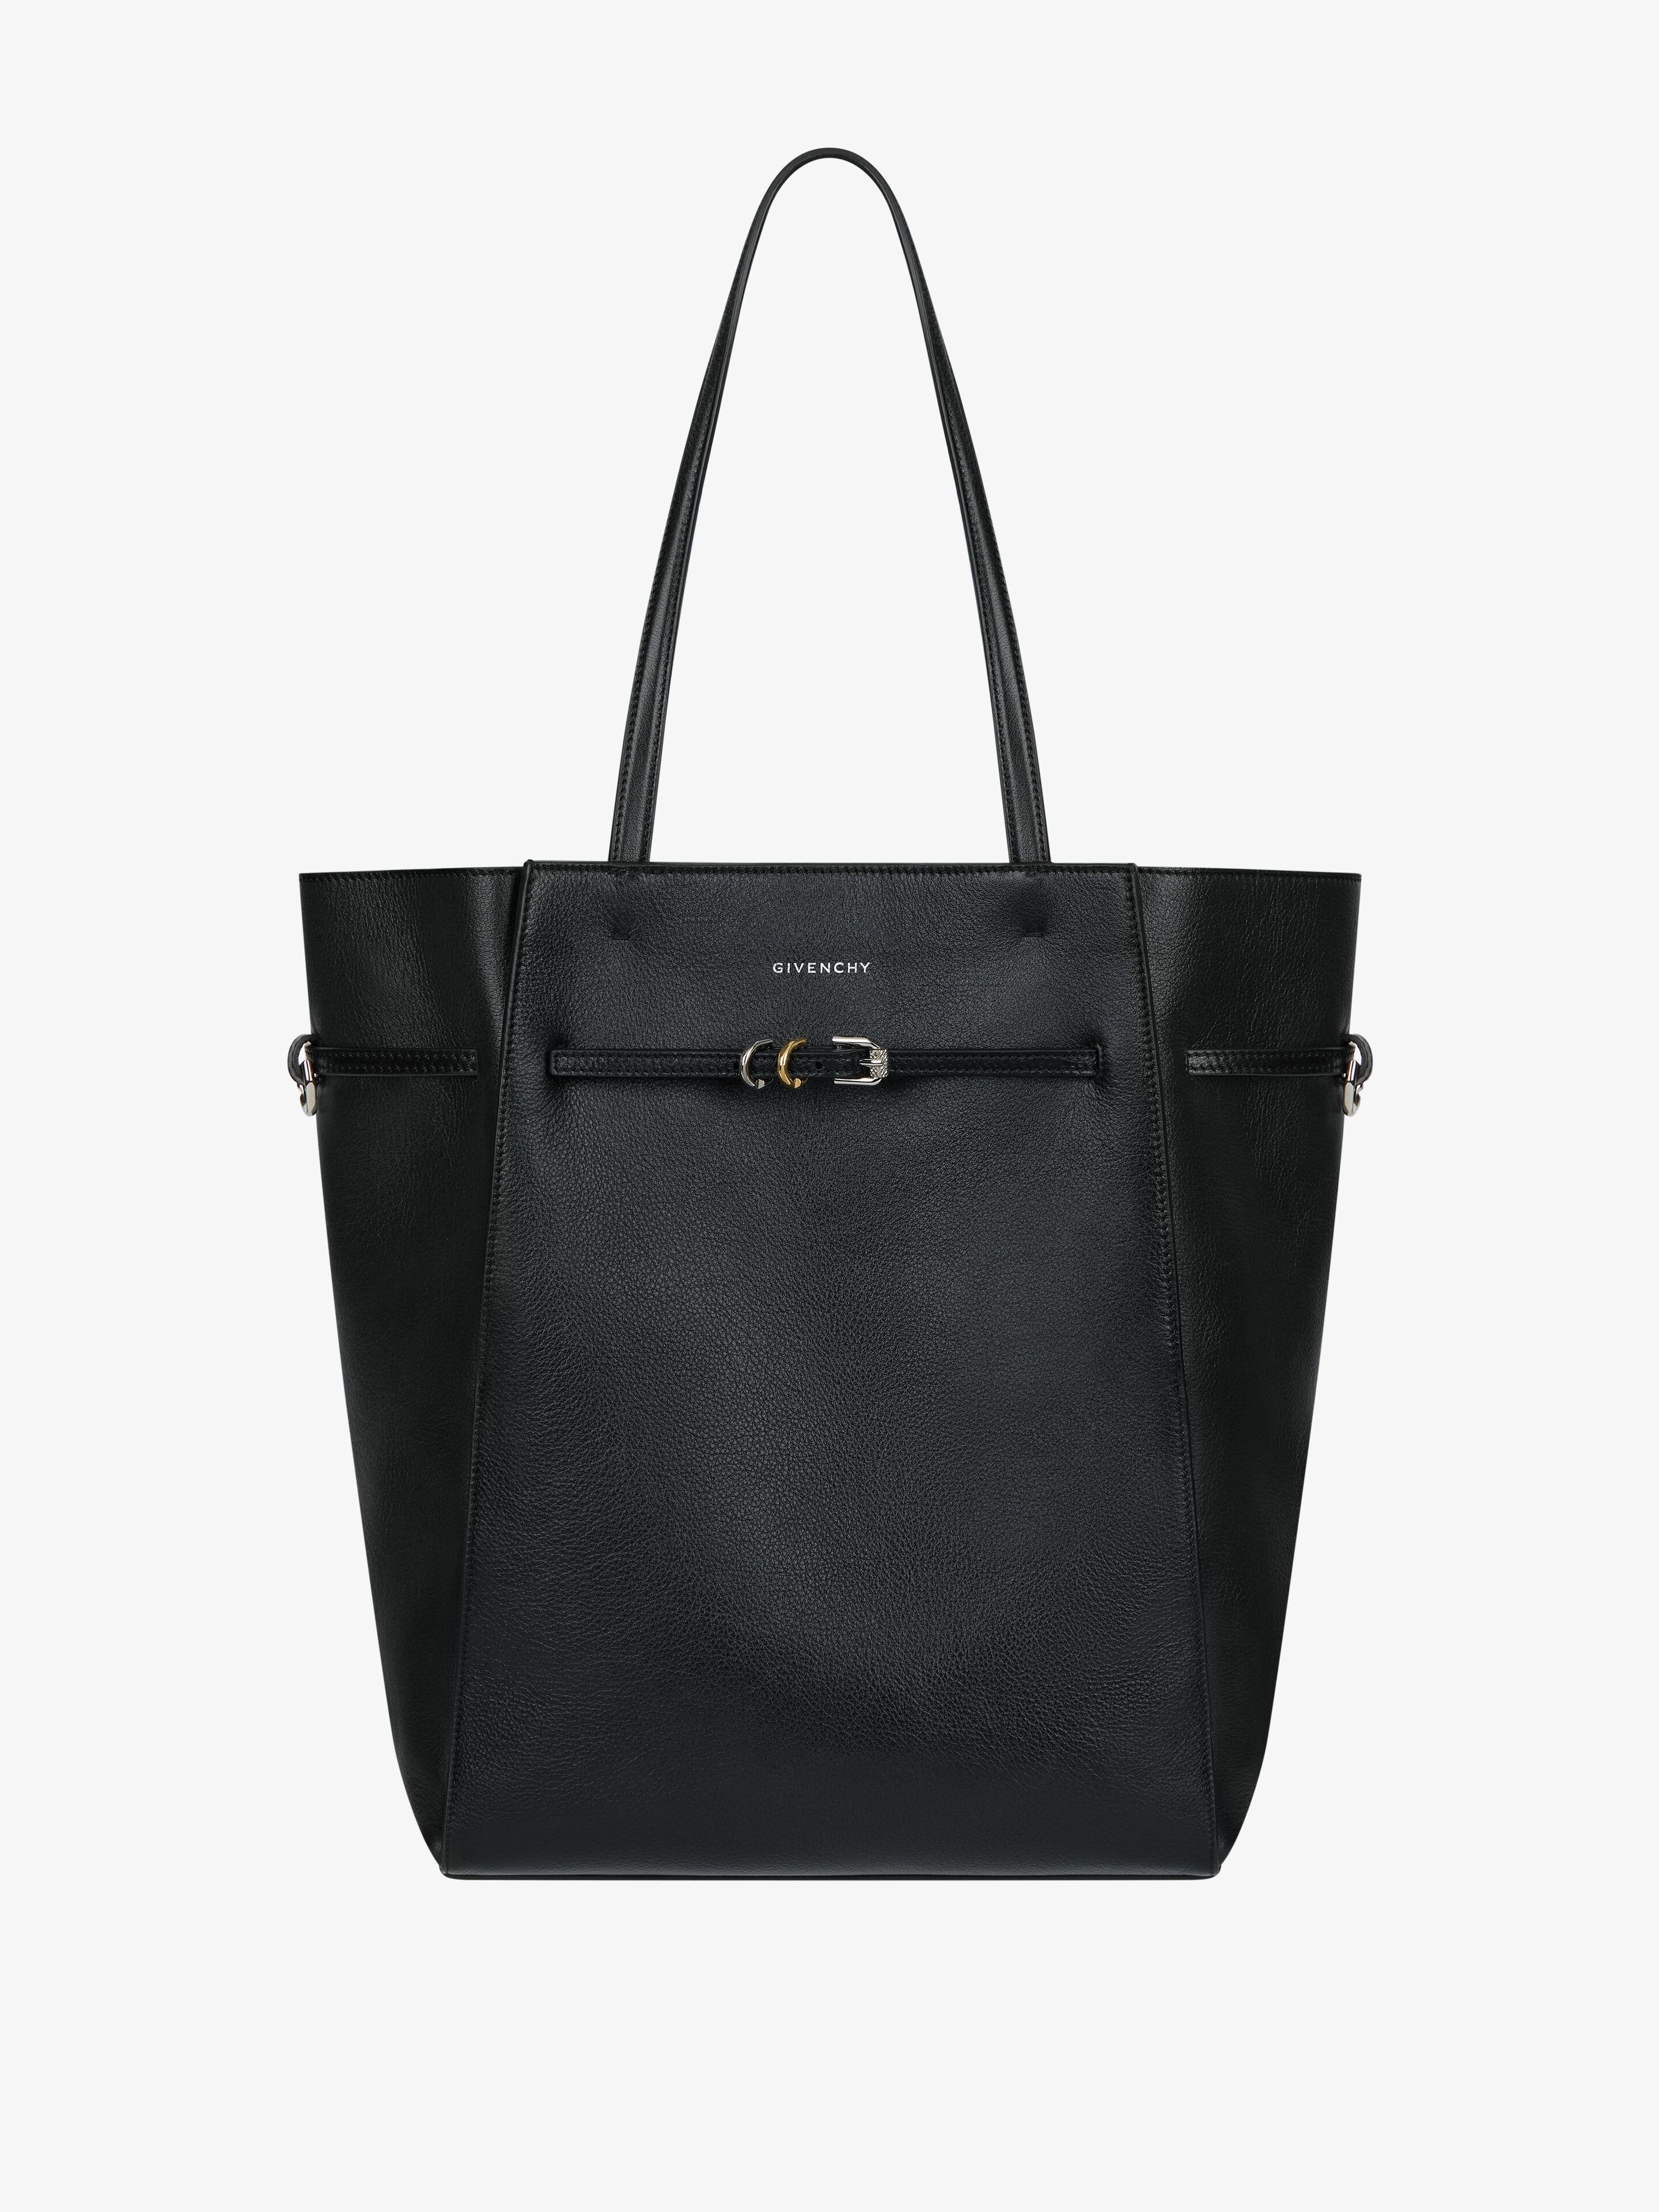 Luxury Bags Collection for Women | Givenchy